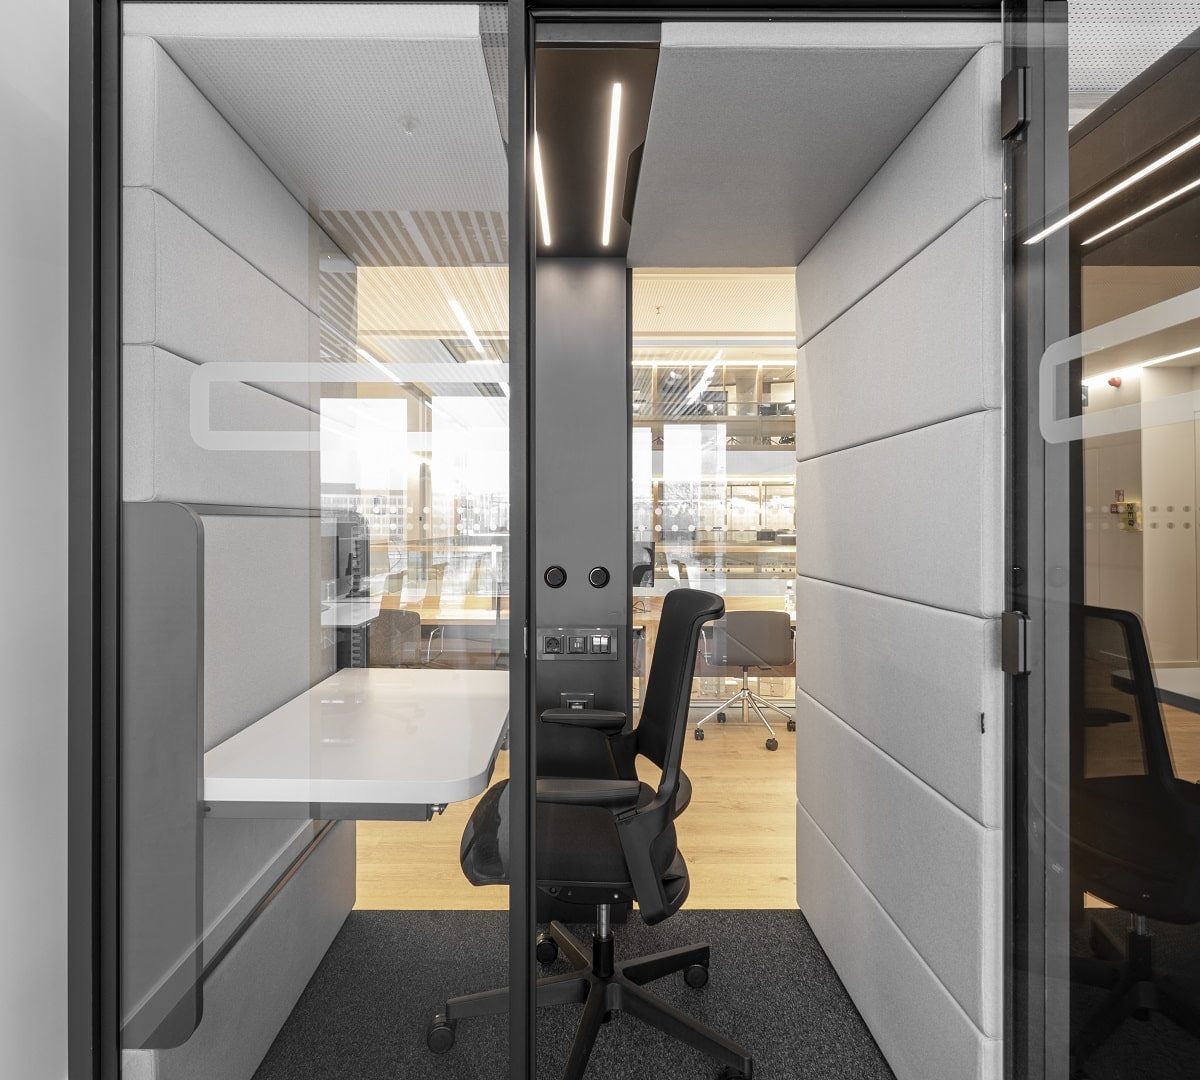 Need individual desk pods to boost privacy? HushWork.sit&stand is an office pod built for privacy. To boot, it unlocks ergonomic flow.